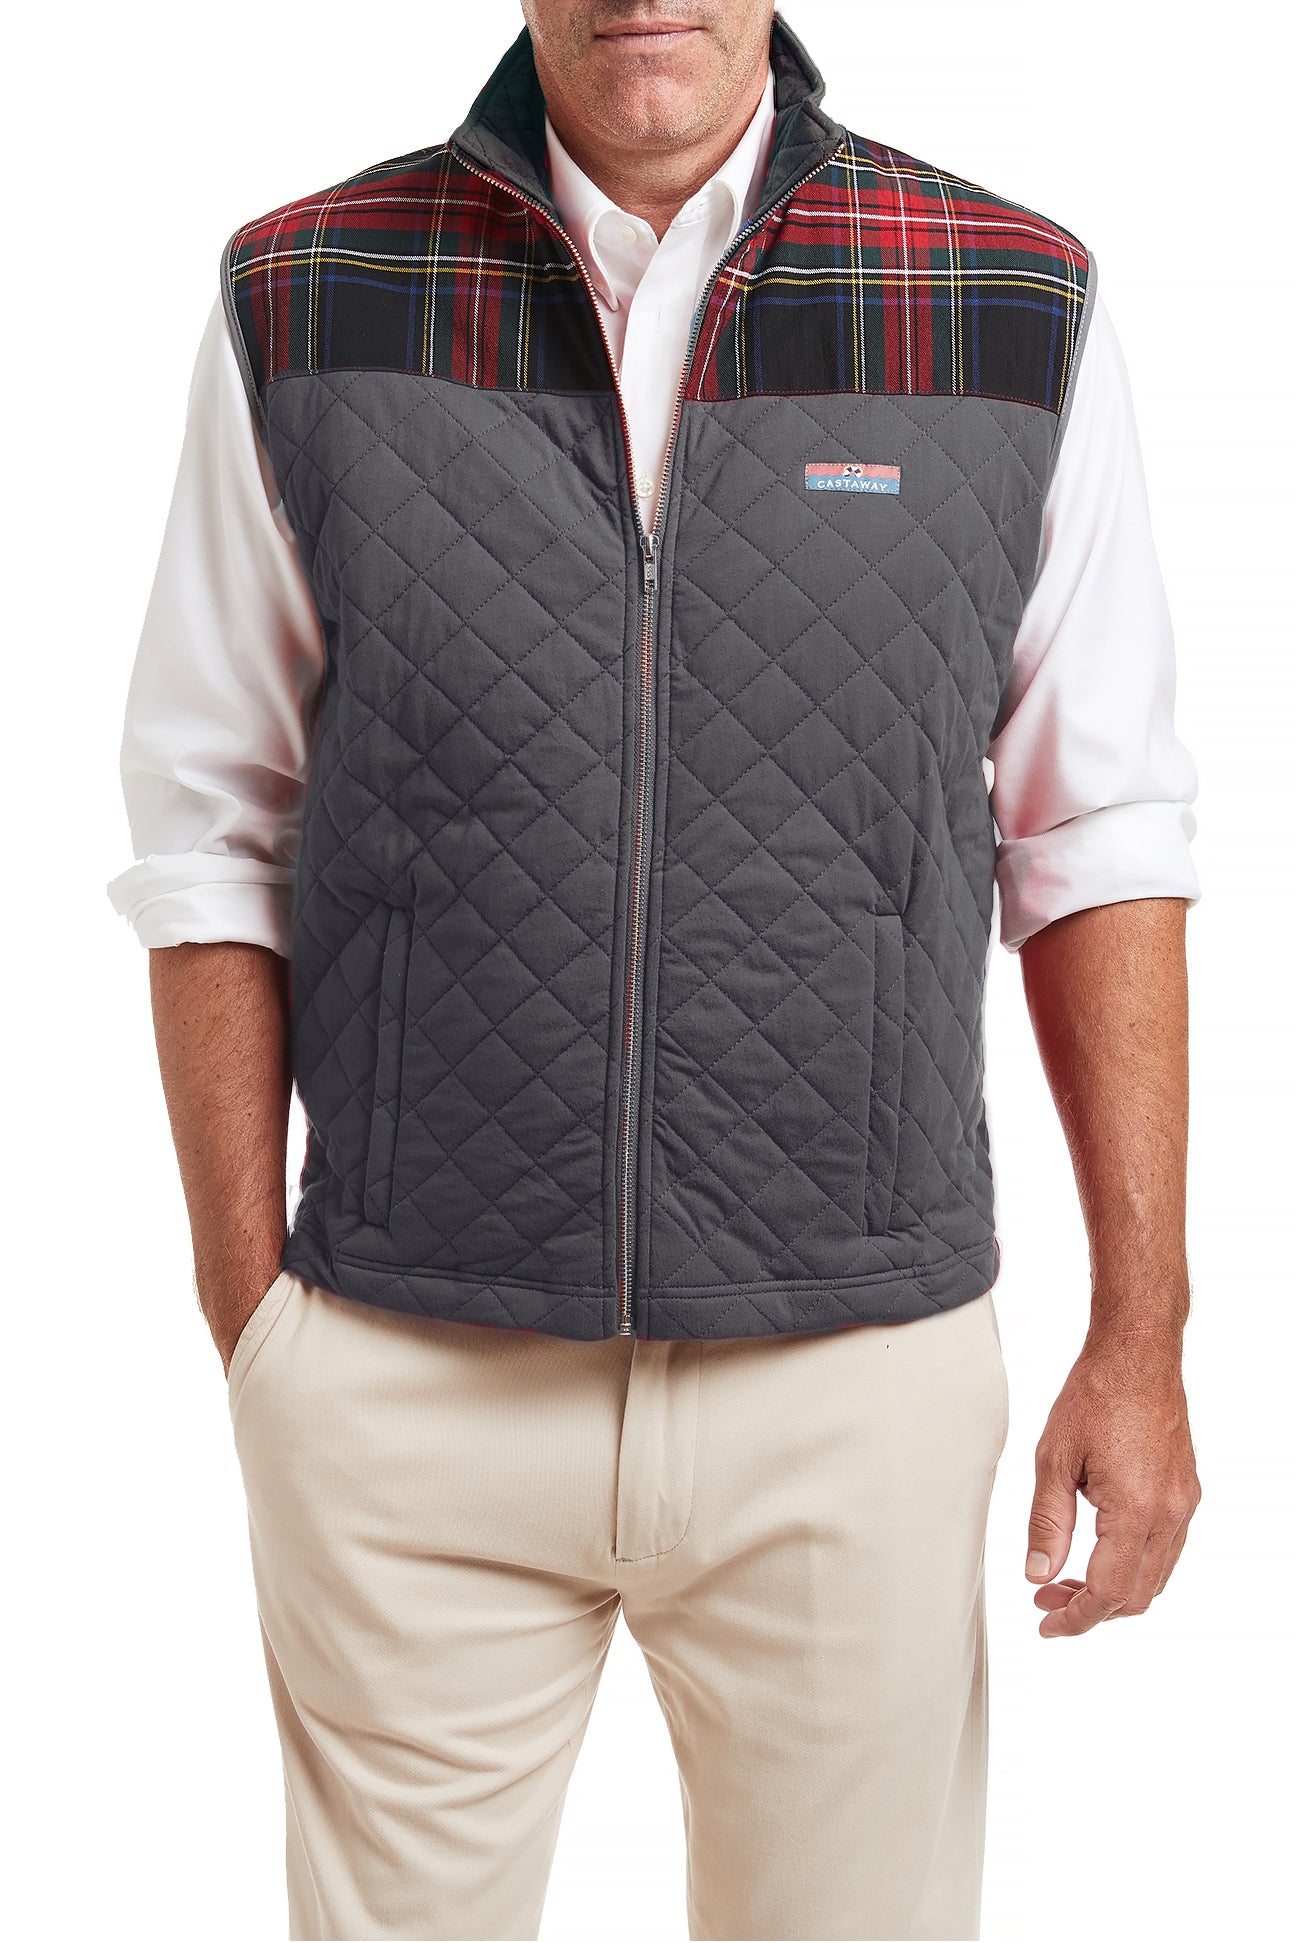 Cross Rip Quilted Vest Charcoal with Blackwatch Trim MENS TOPS Castaway Nantucket Island